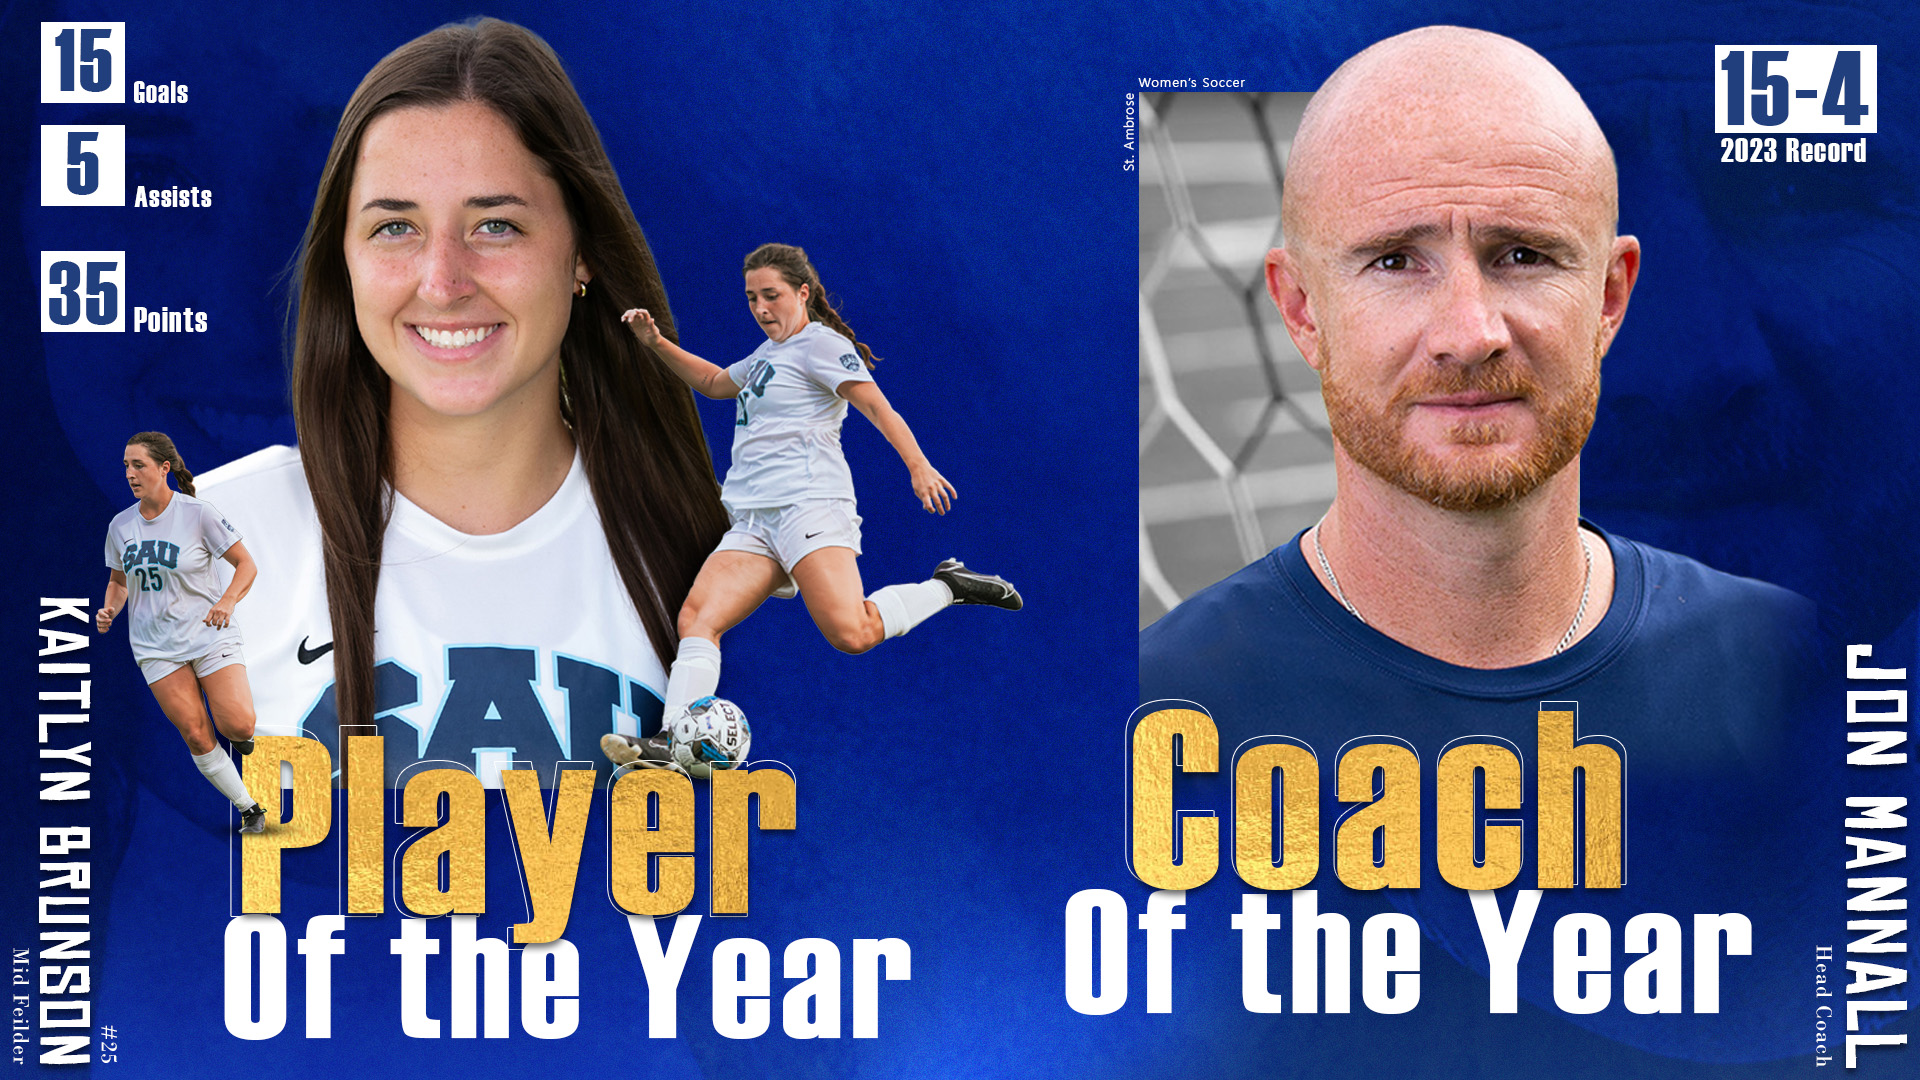 Brunson named Player of the Year, Mannall selected as Coach of the Year